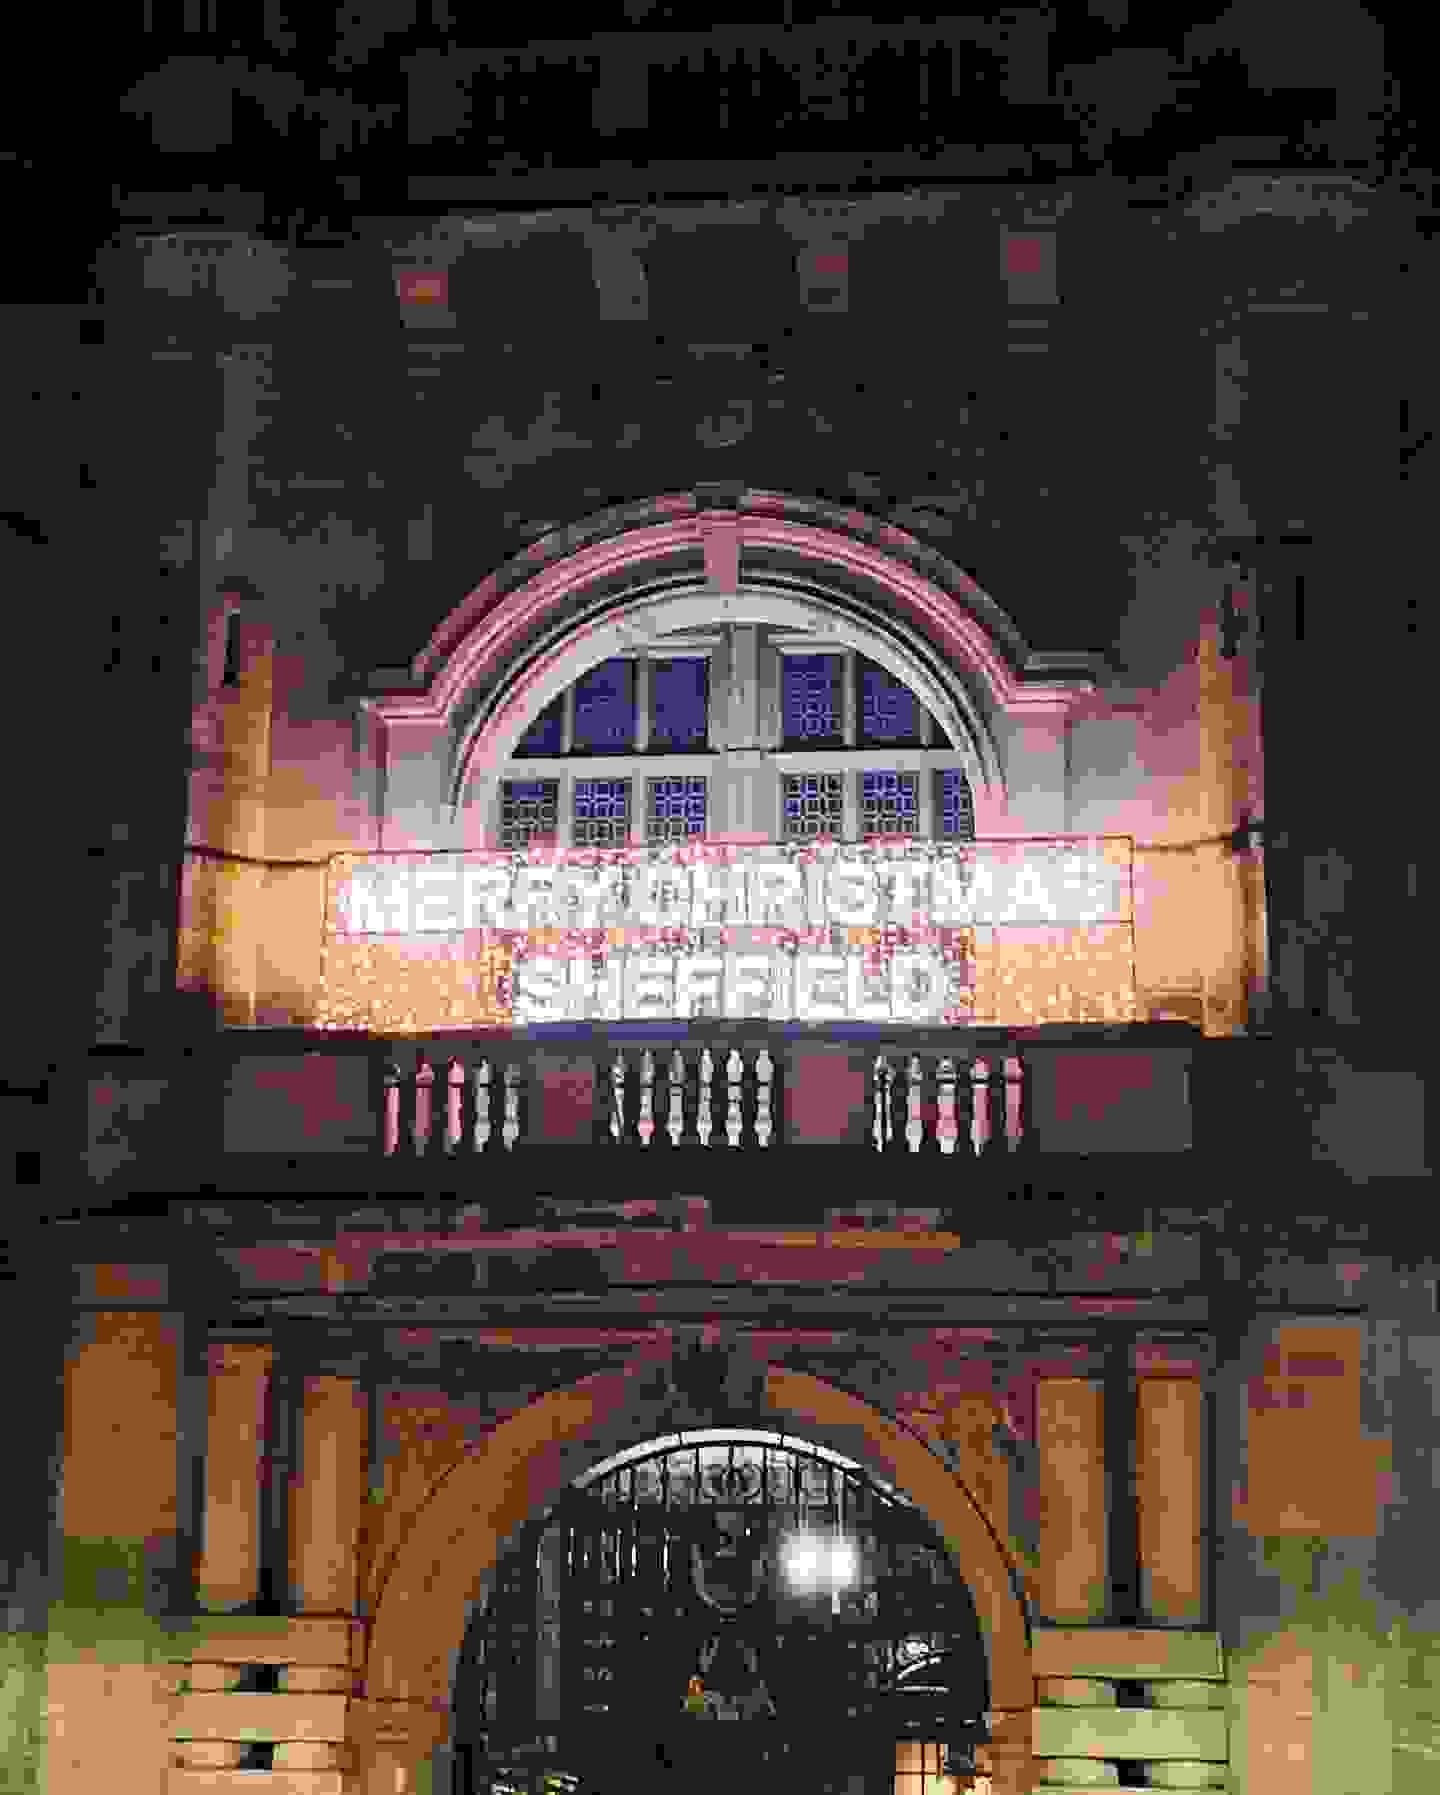 "Merry Christmas Sheffield" written in lights across the front of the town hall